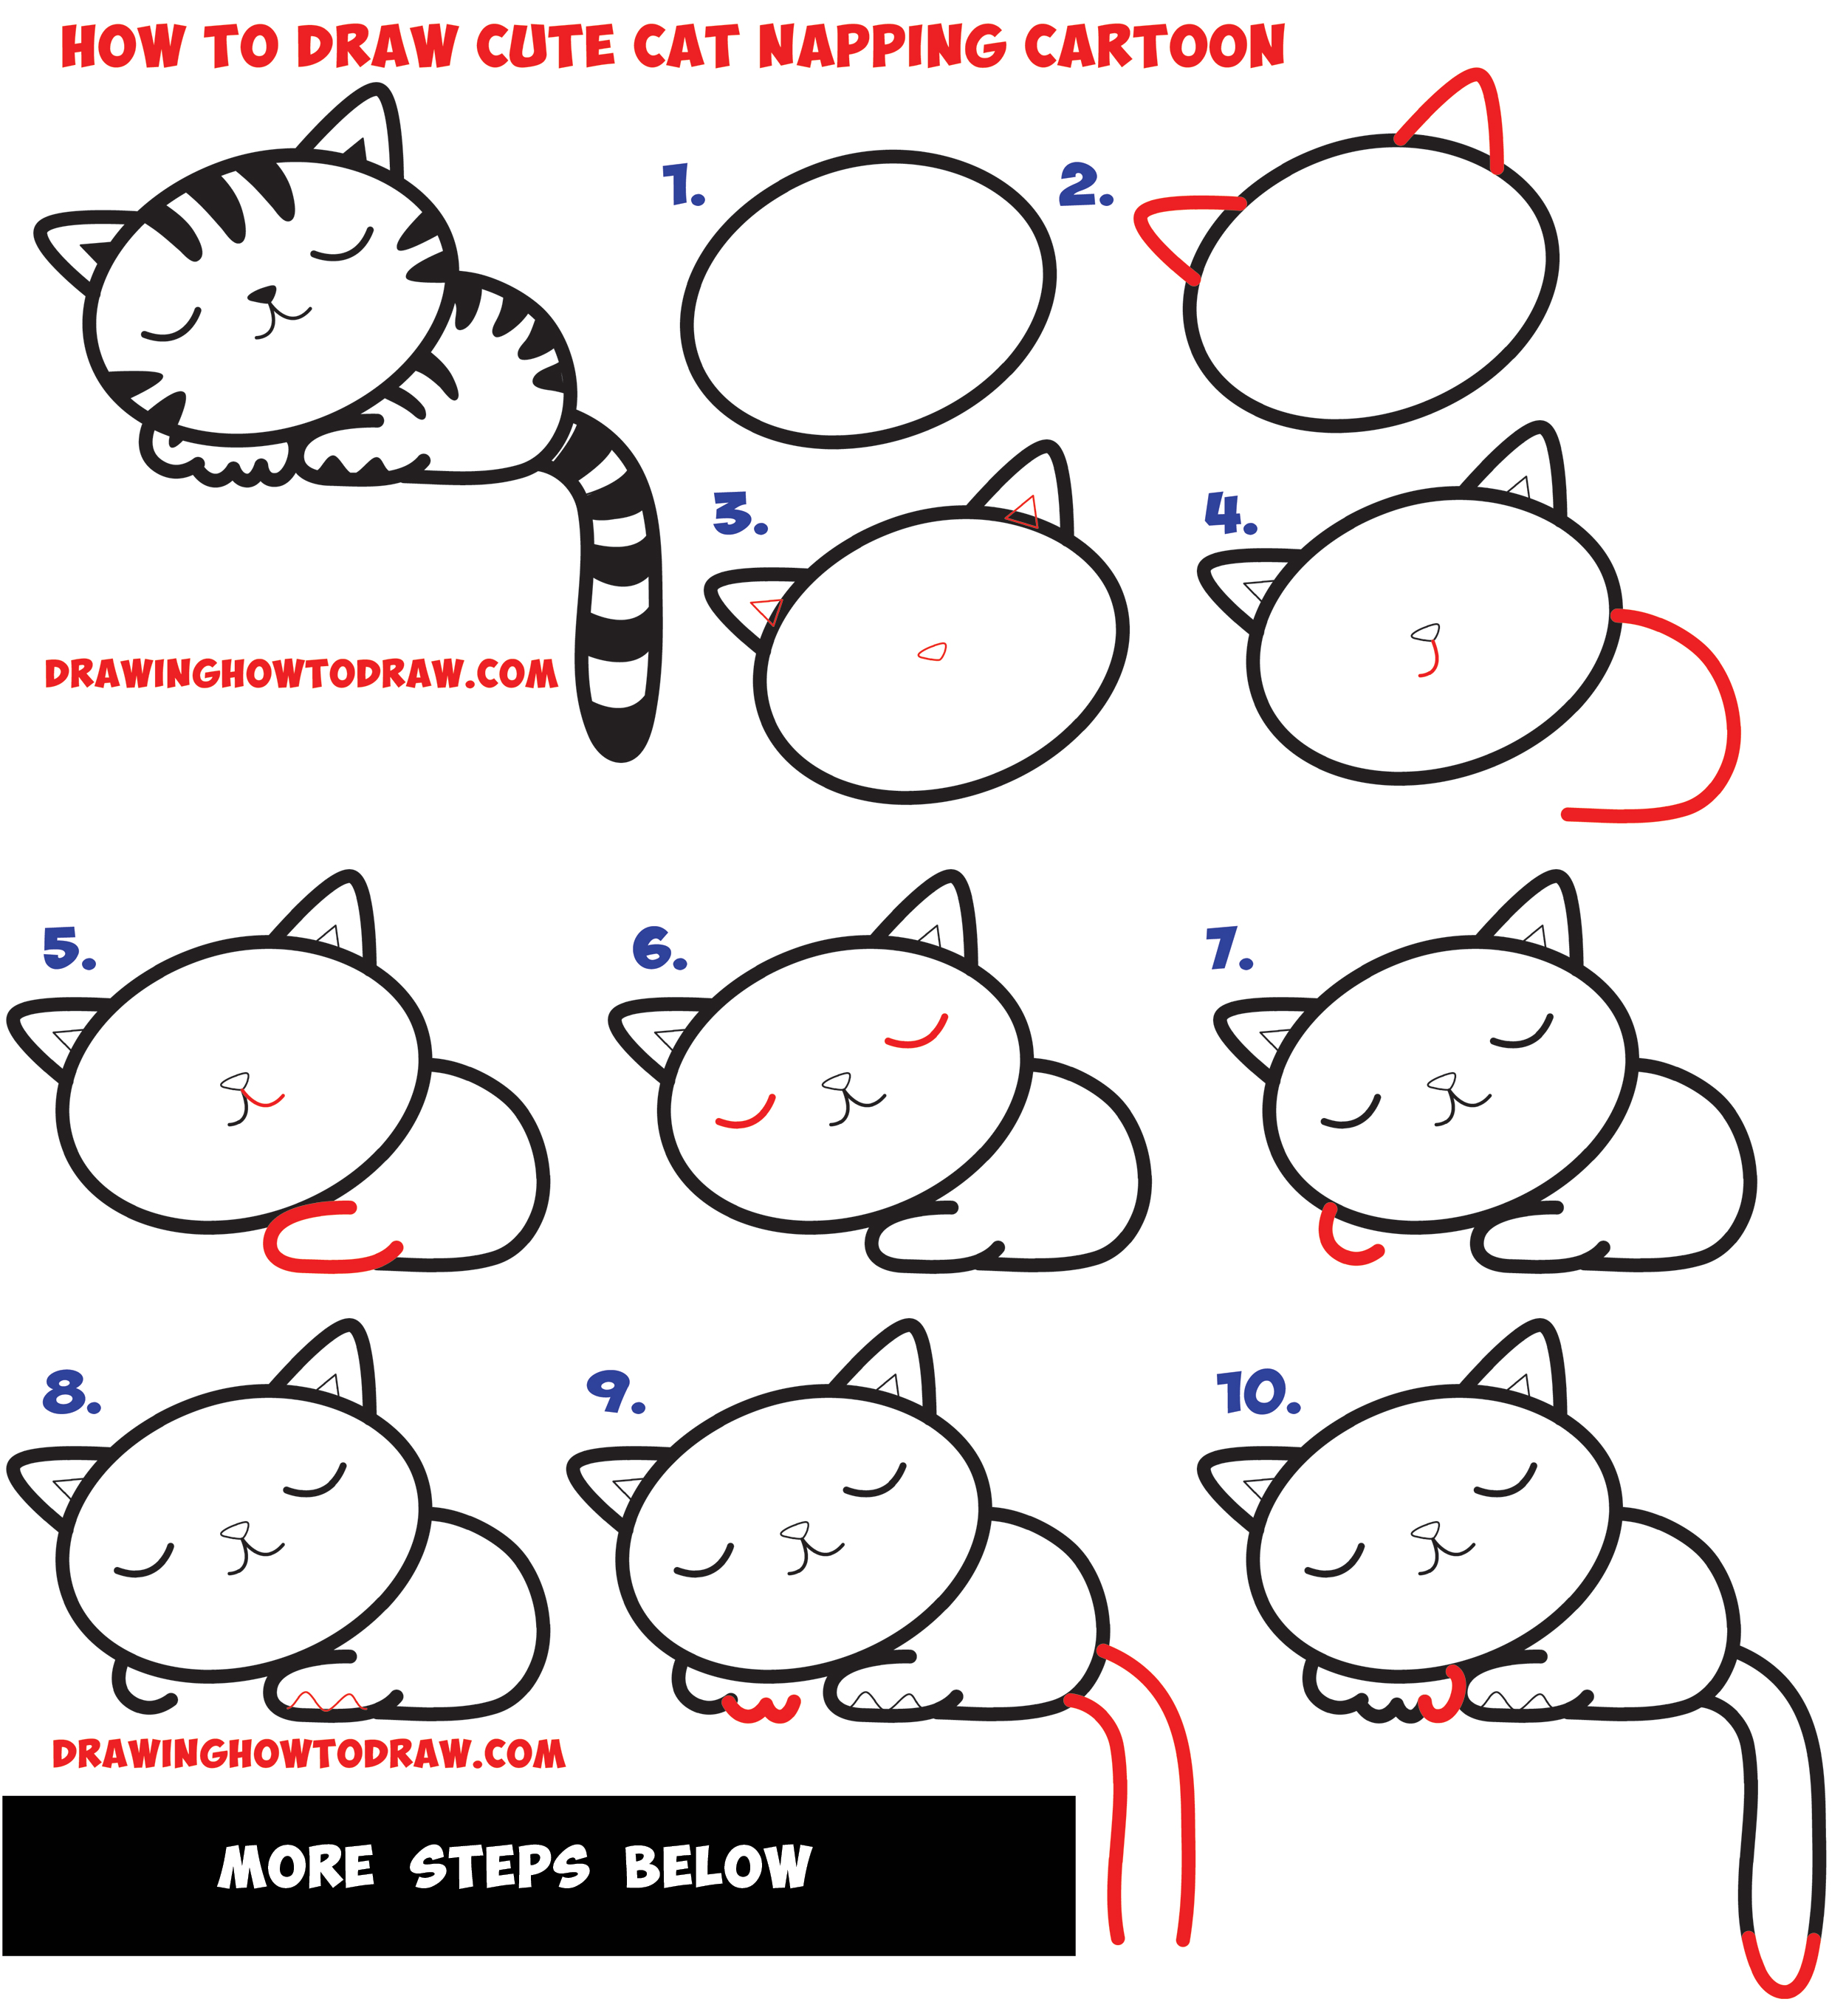 How to Draw a Supercute Kawaii / Cartoon Cat / Kitten Napping Easy Step by Step Drawing Tutorial for Kids